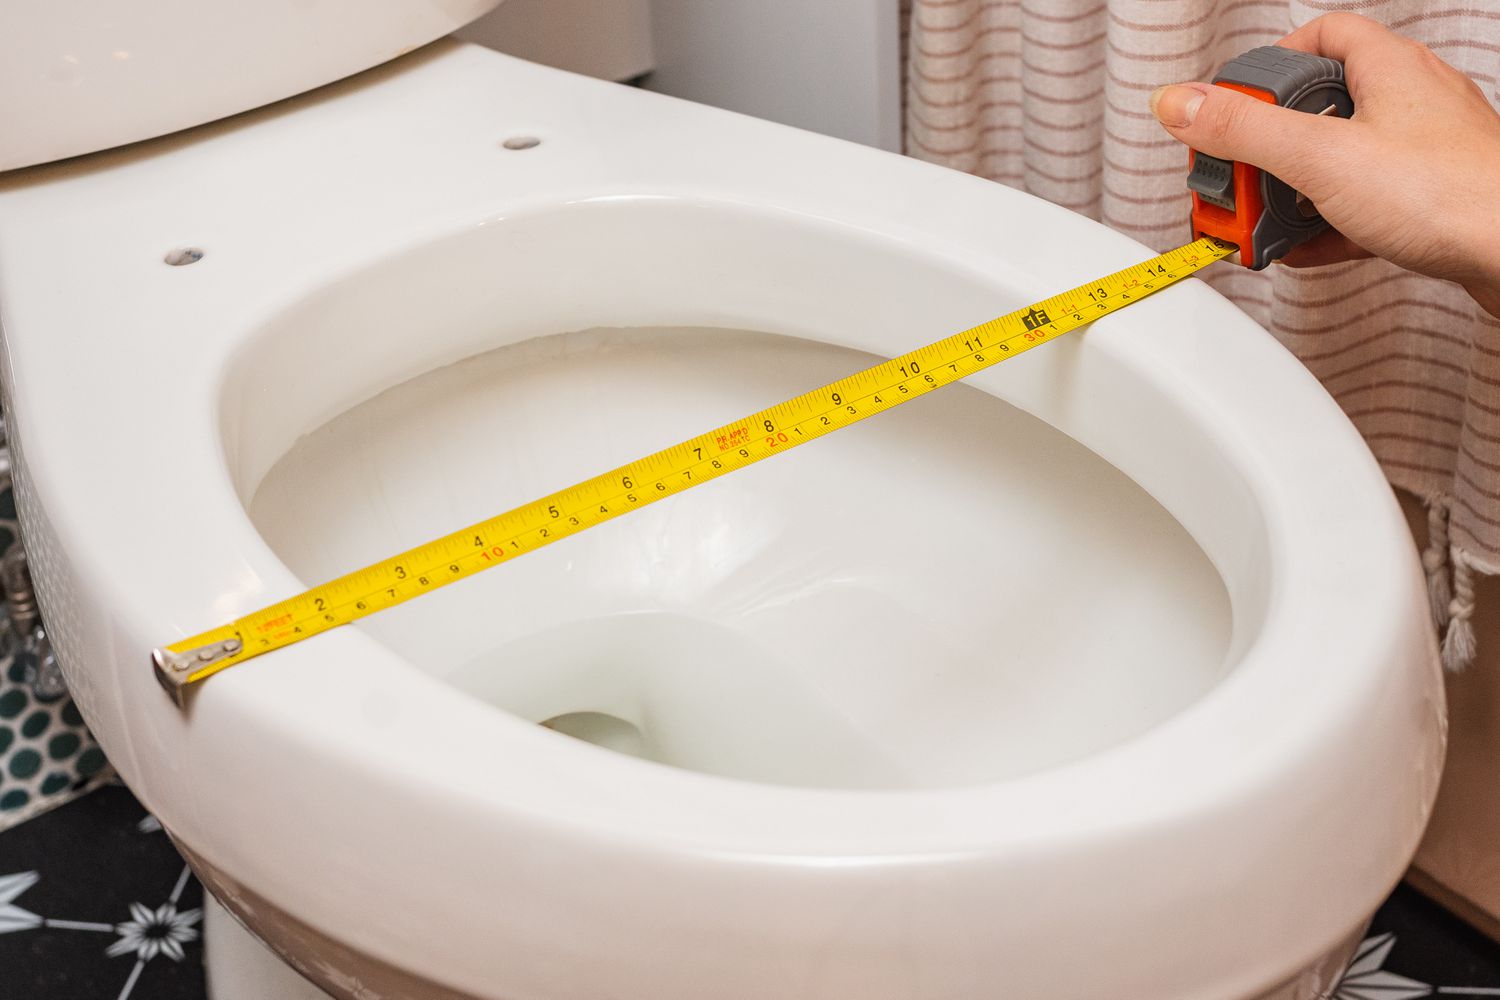 How To Measure Toilet Bowl Size